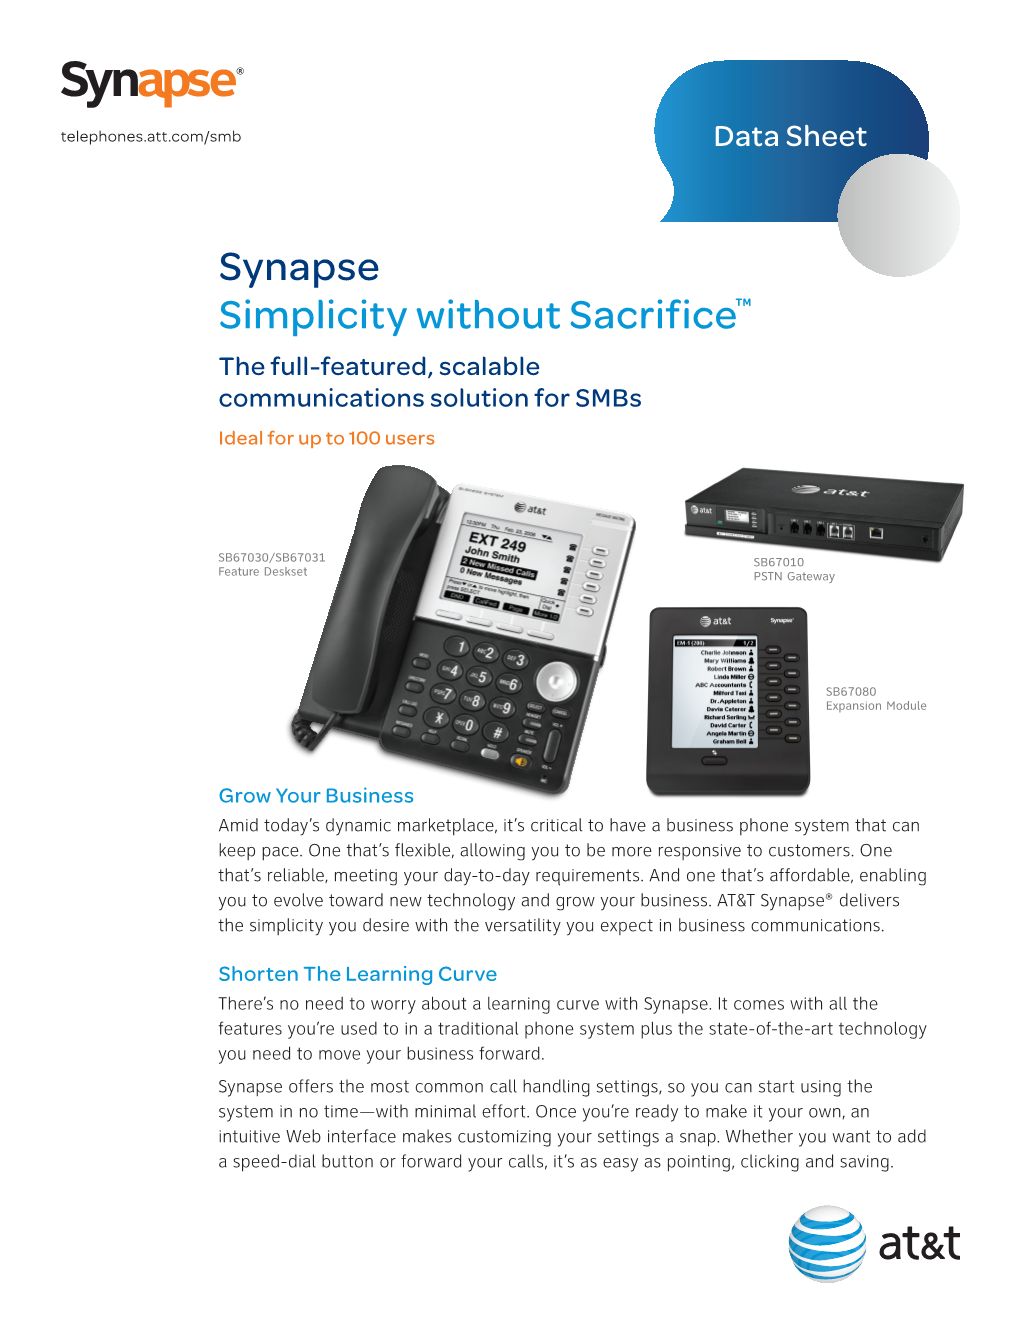 Synapse Simplicity Without Sacrifice™ the Full-Featured, Scalable Communications Solution for Smbs Ideal for up to 100 Users